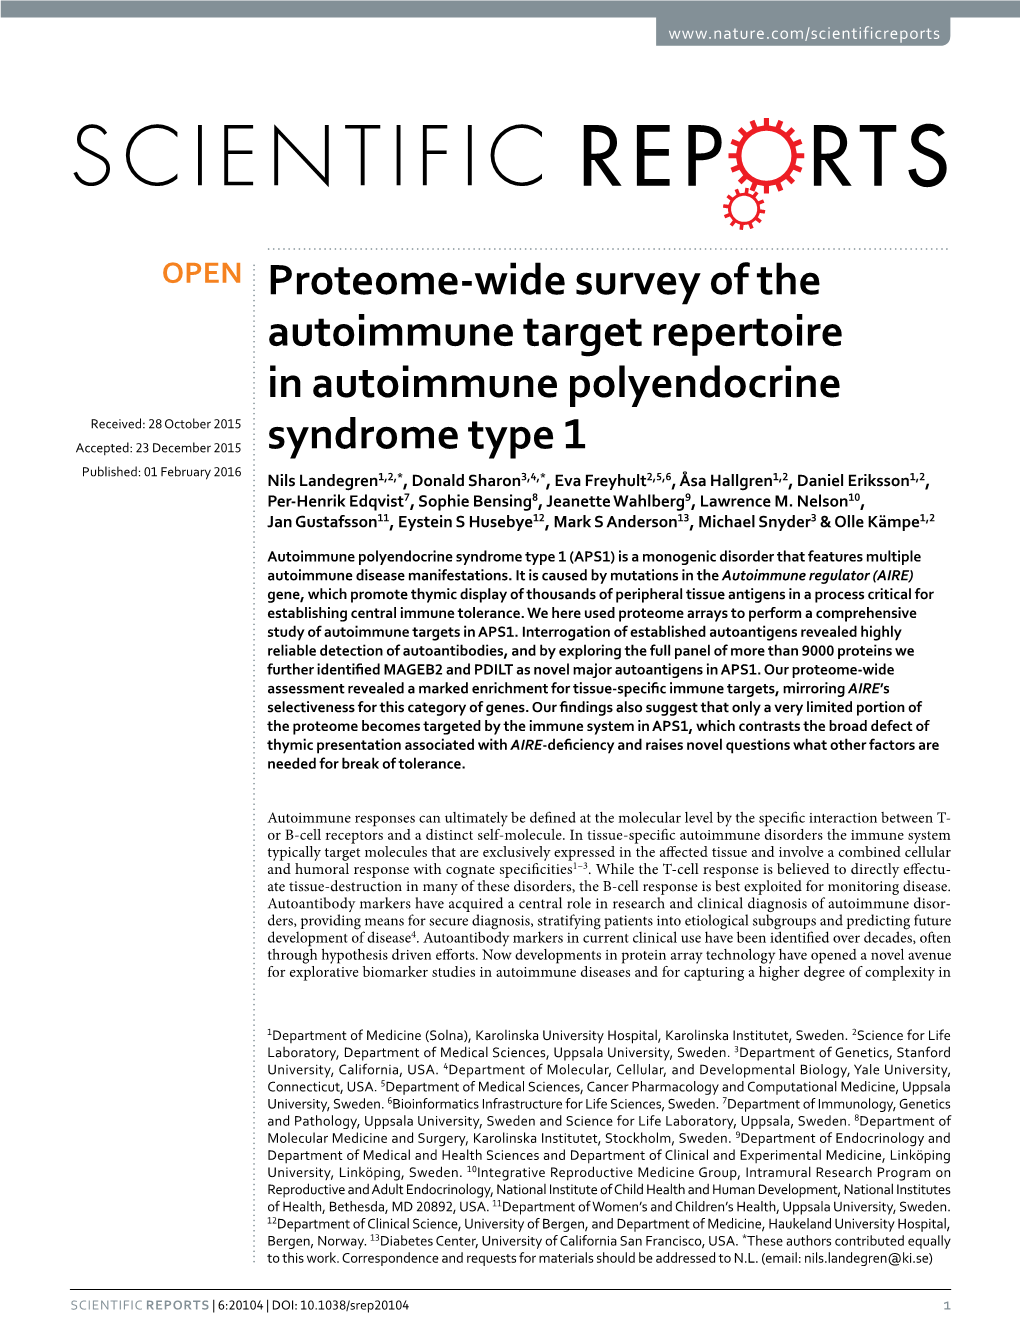 Proteome-Wide Survey of the Autoimmune Target Repertoire In